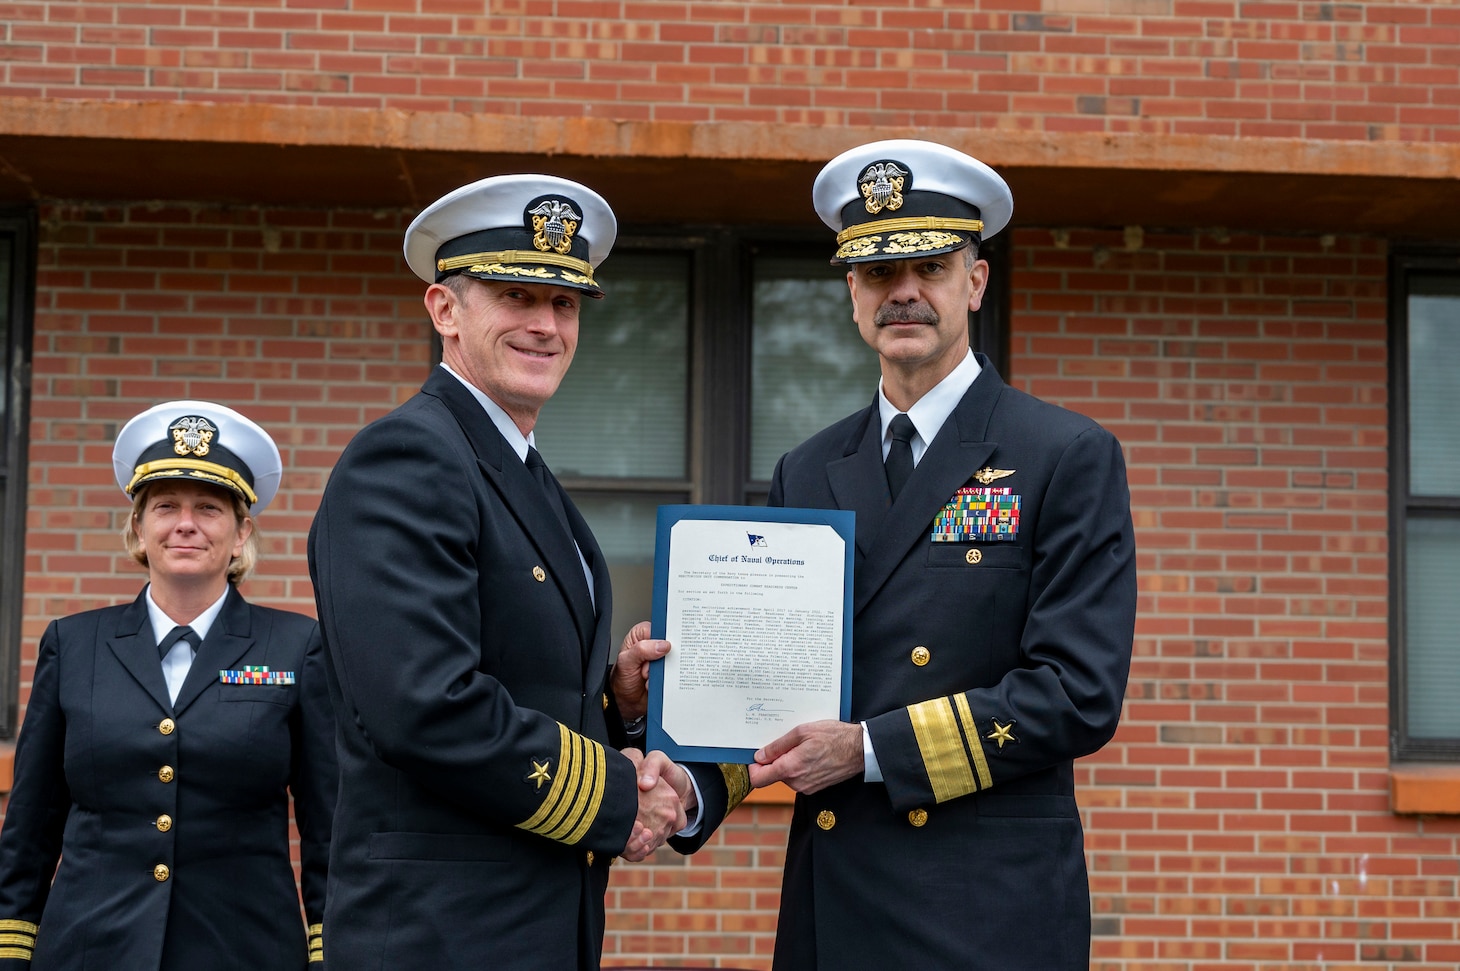 Rear Adm. Michael Steffen presents a Meritorious Unit Commendation to Capt. Daniel Layton, commanding officer of Mobilization and Deployment Support Command, during the launch ceremony for Mobilization and Deployment Support Command.